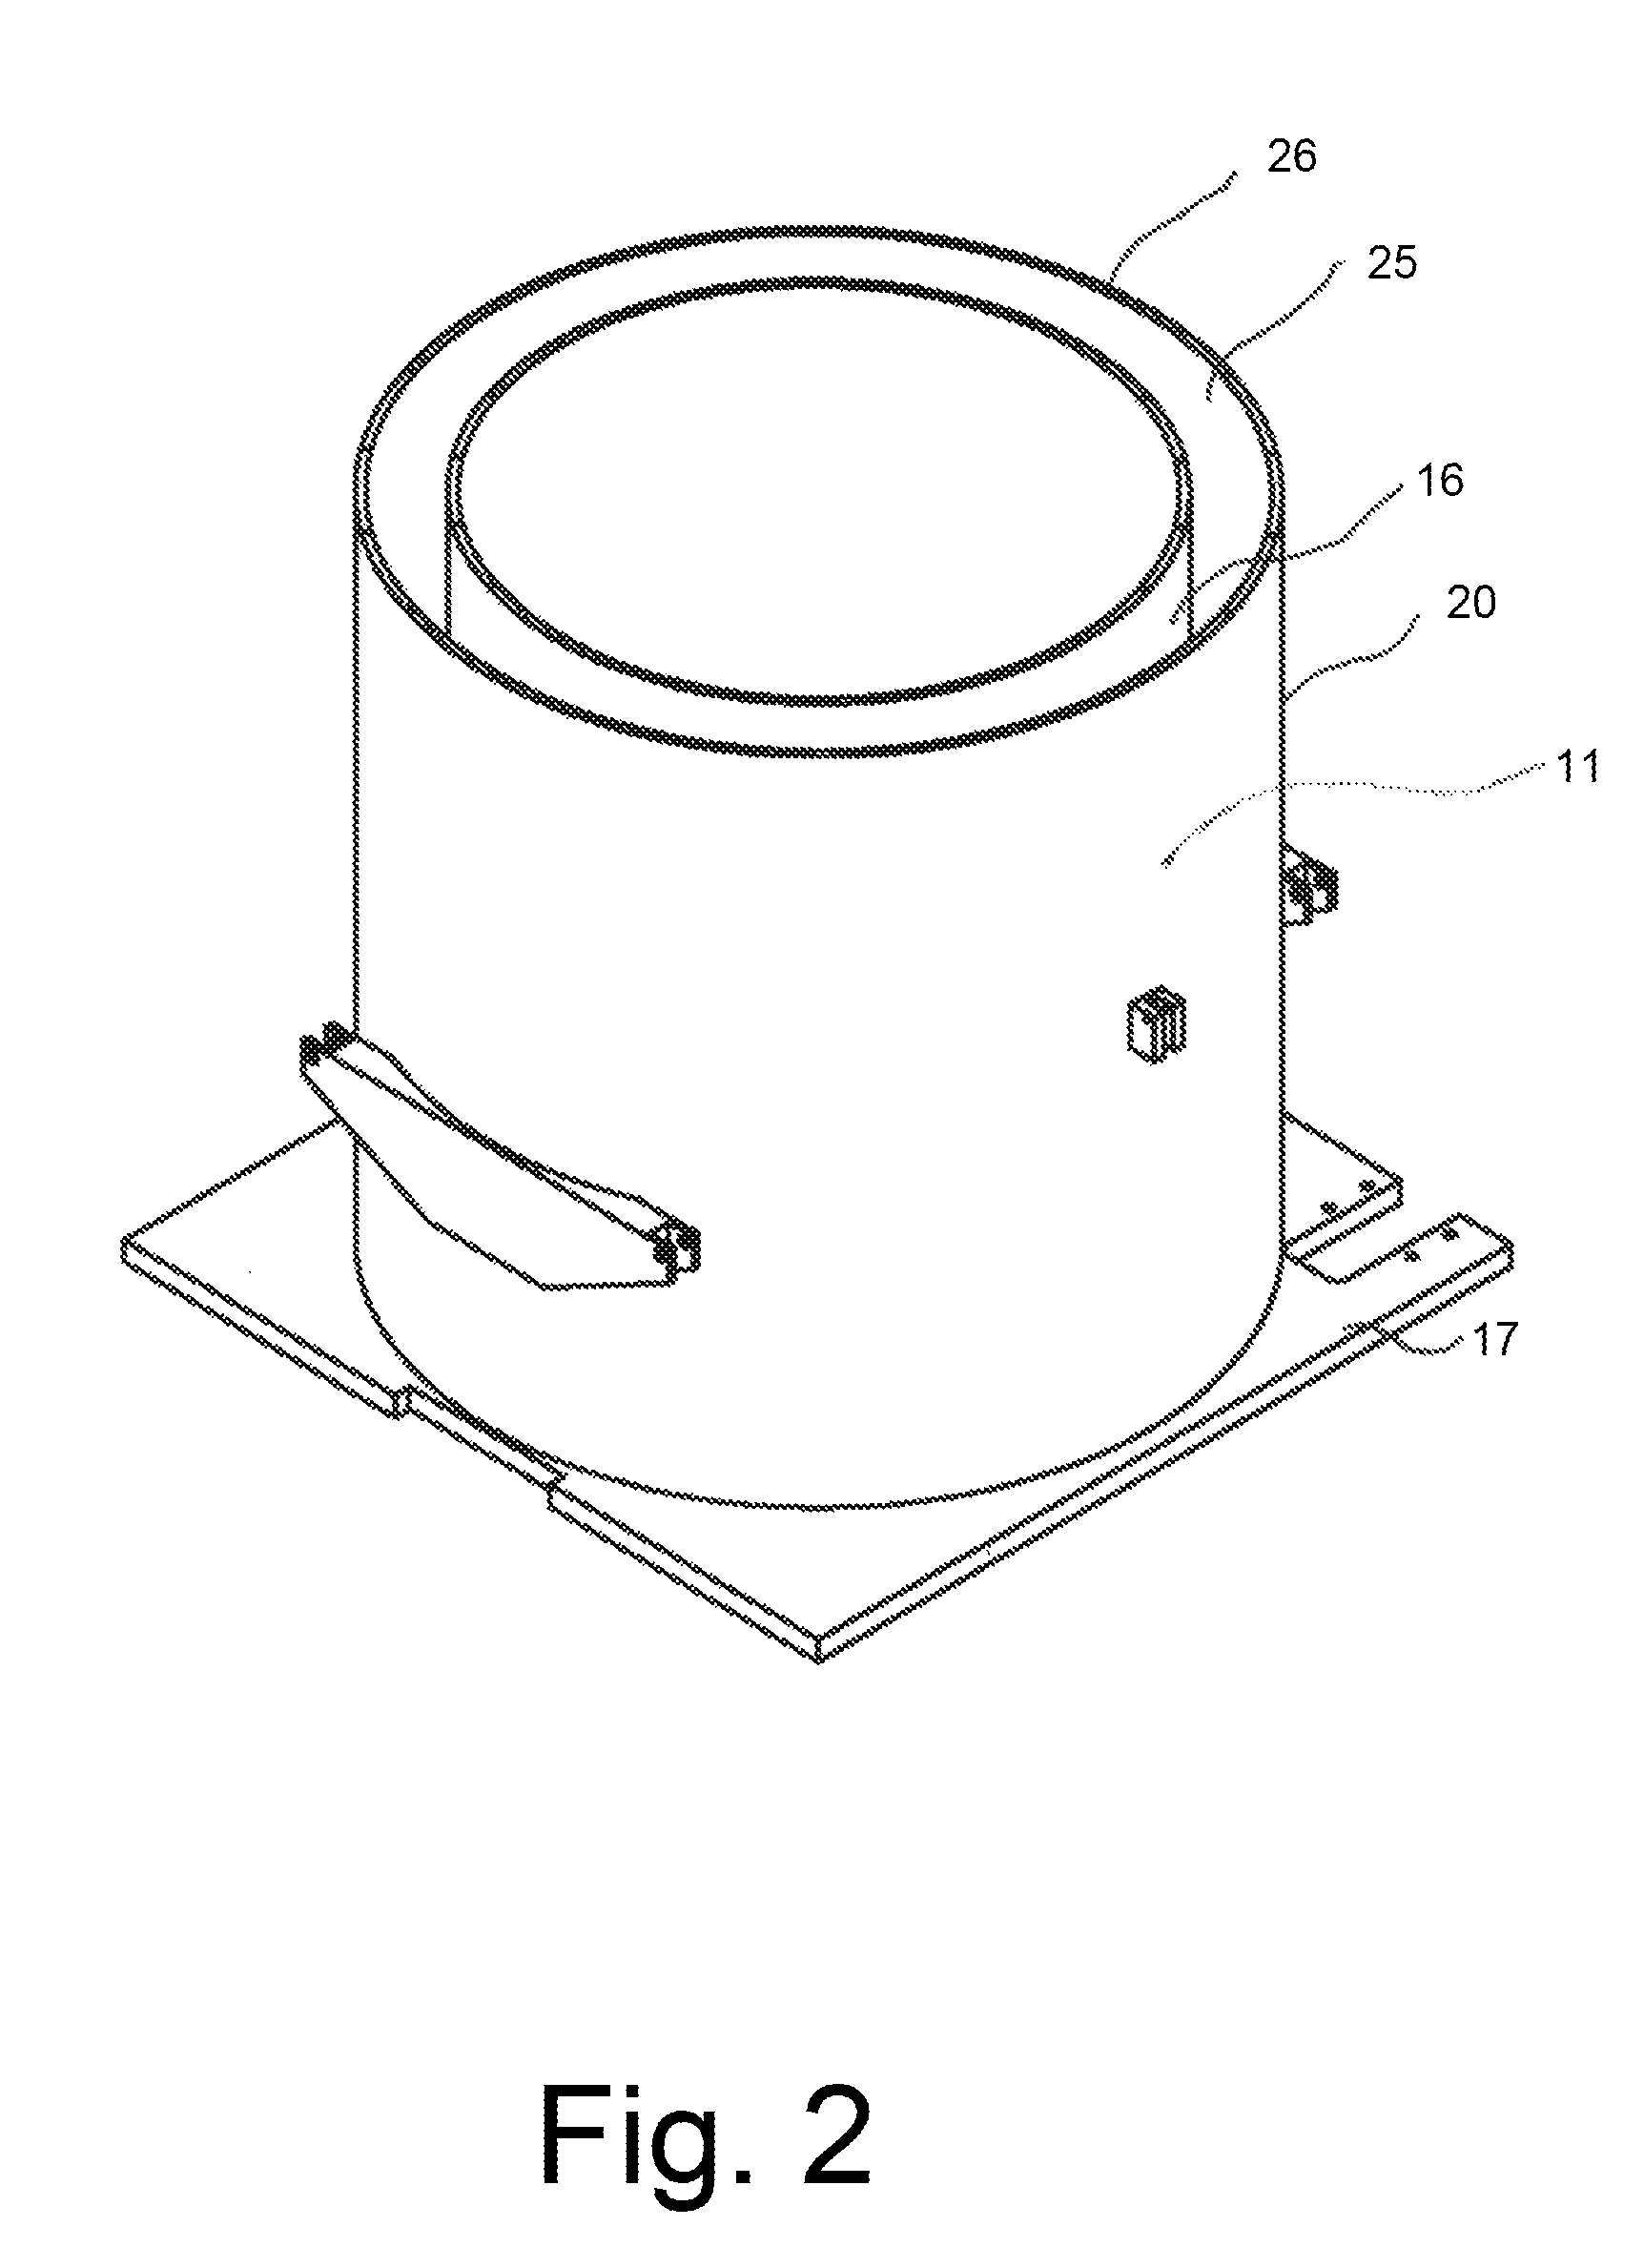 Lid actuation system for shielded cask